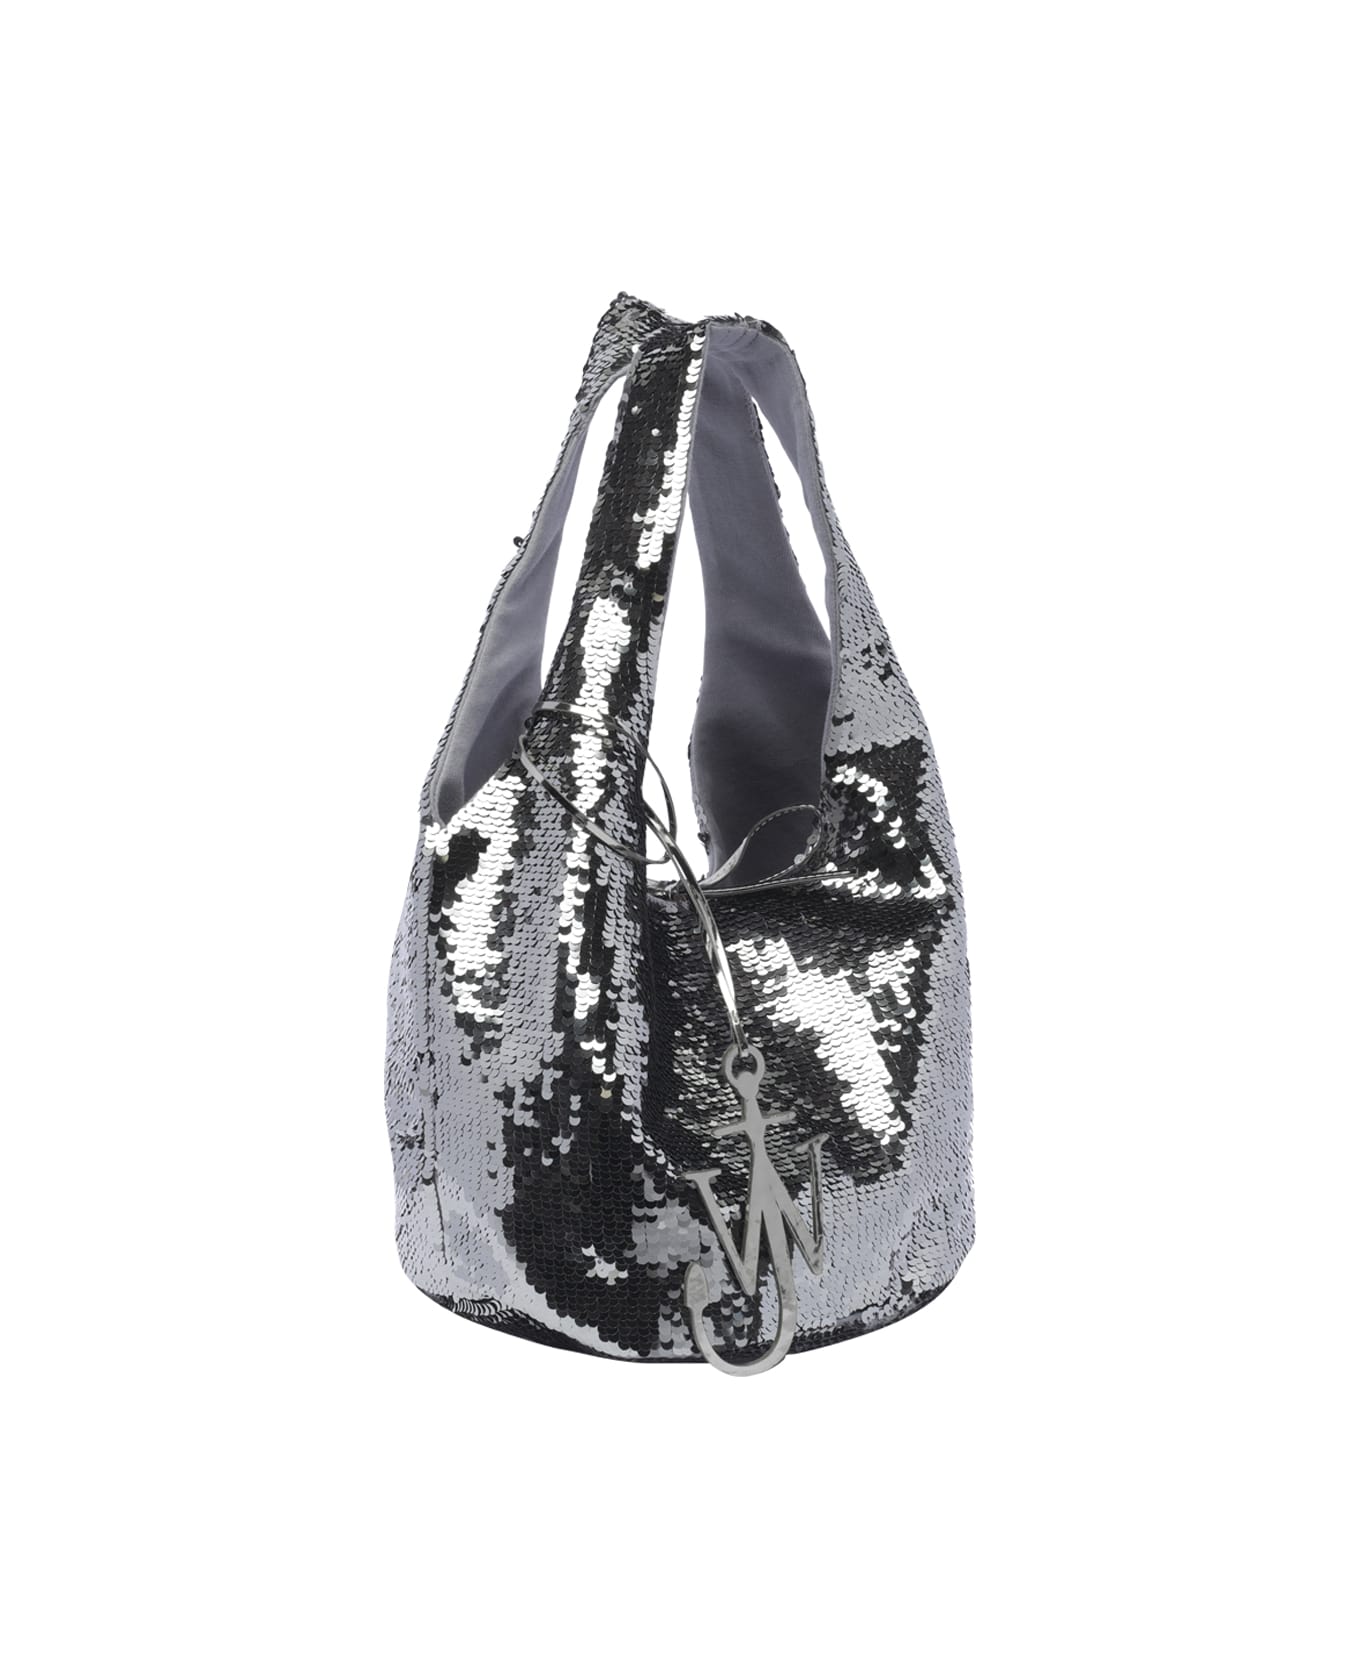 J.W. Anderson Mini Sequins Shopping Bag - Charcoal